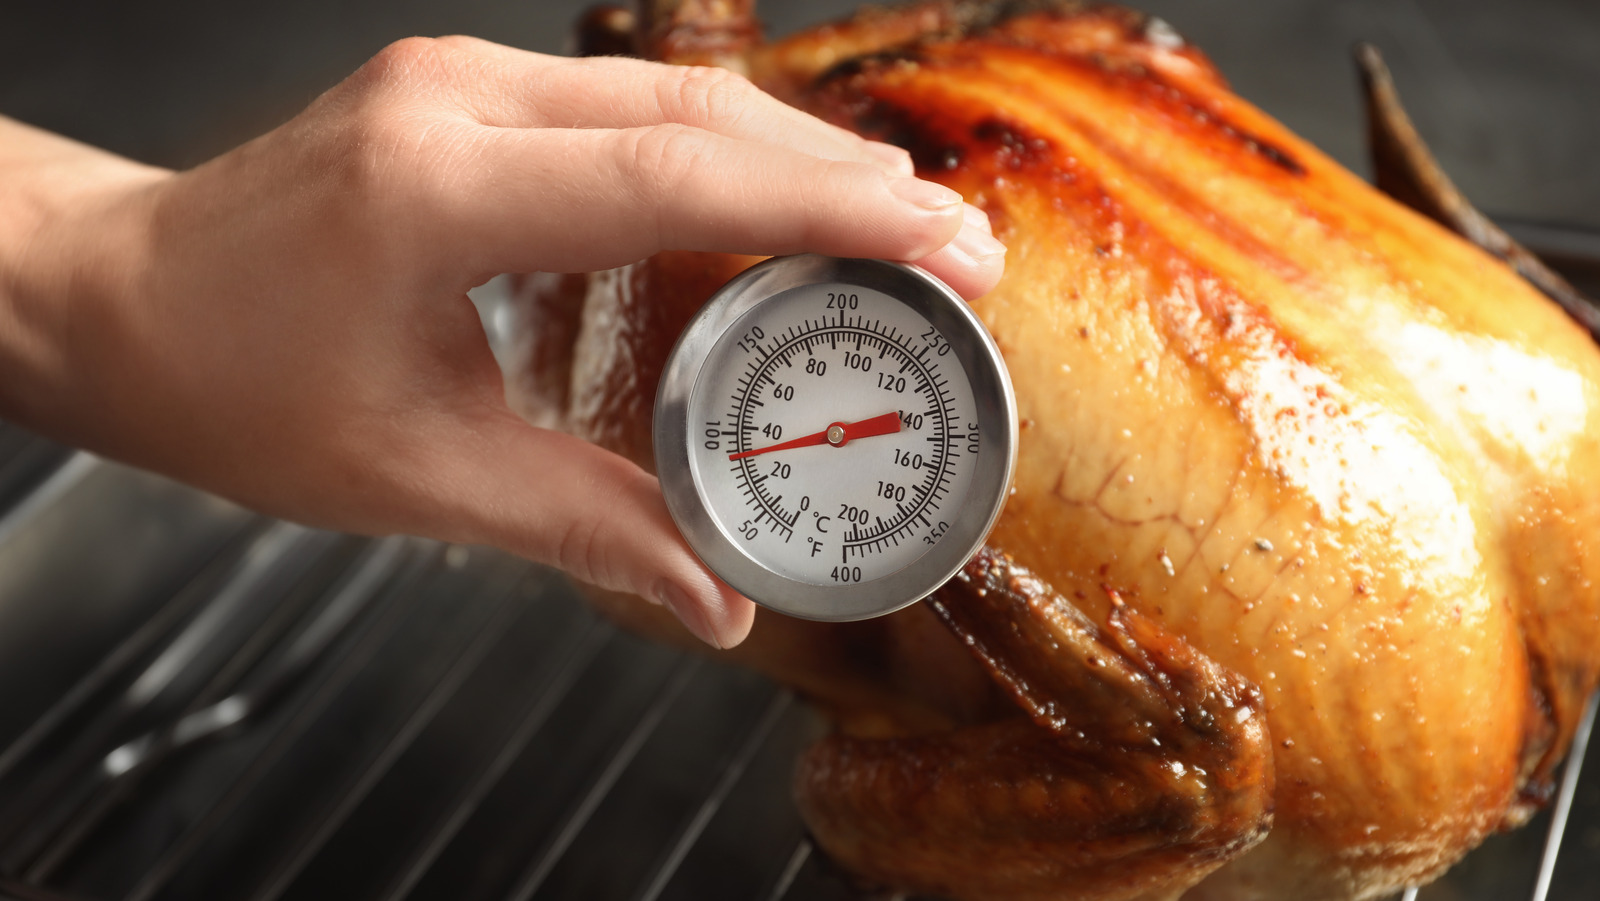 https://www.thedailymeal.com/img/gallery/the-best-ways-to-use-a-meat-thermometer-that-arent-for-checking-meat-doneness/l-intro-1676296883.jpg